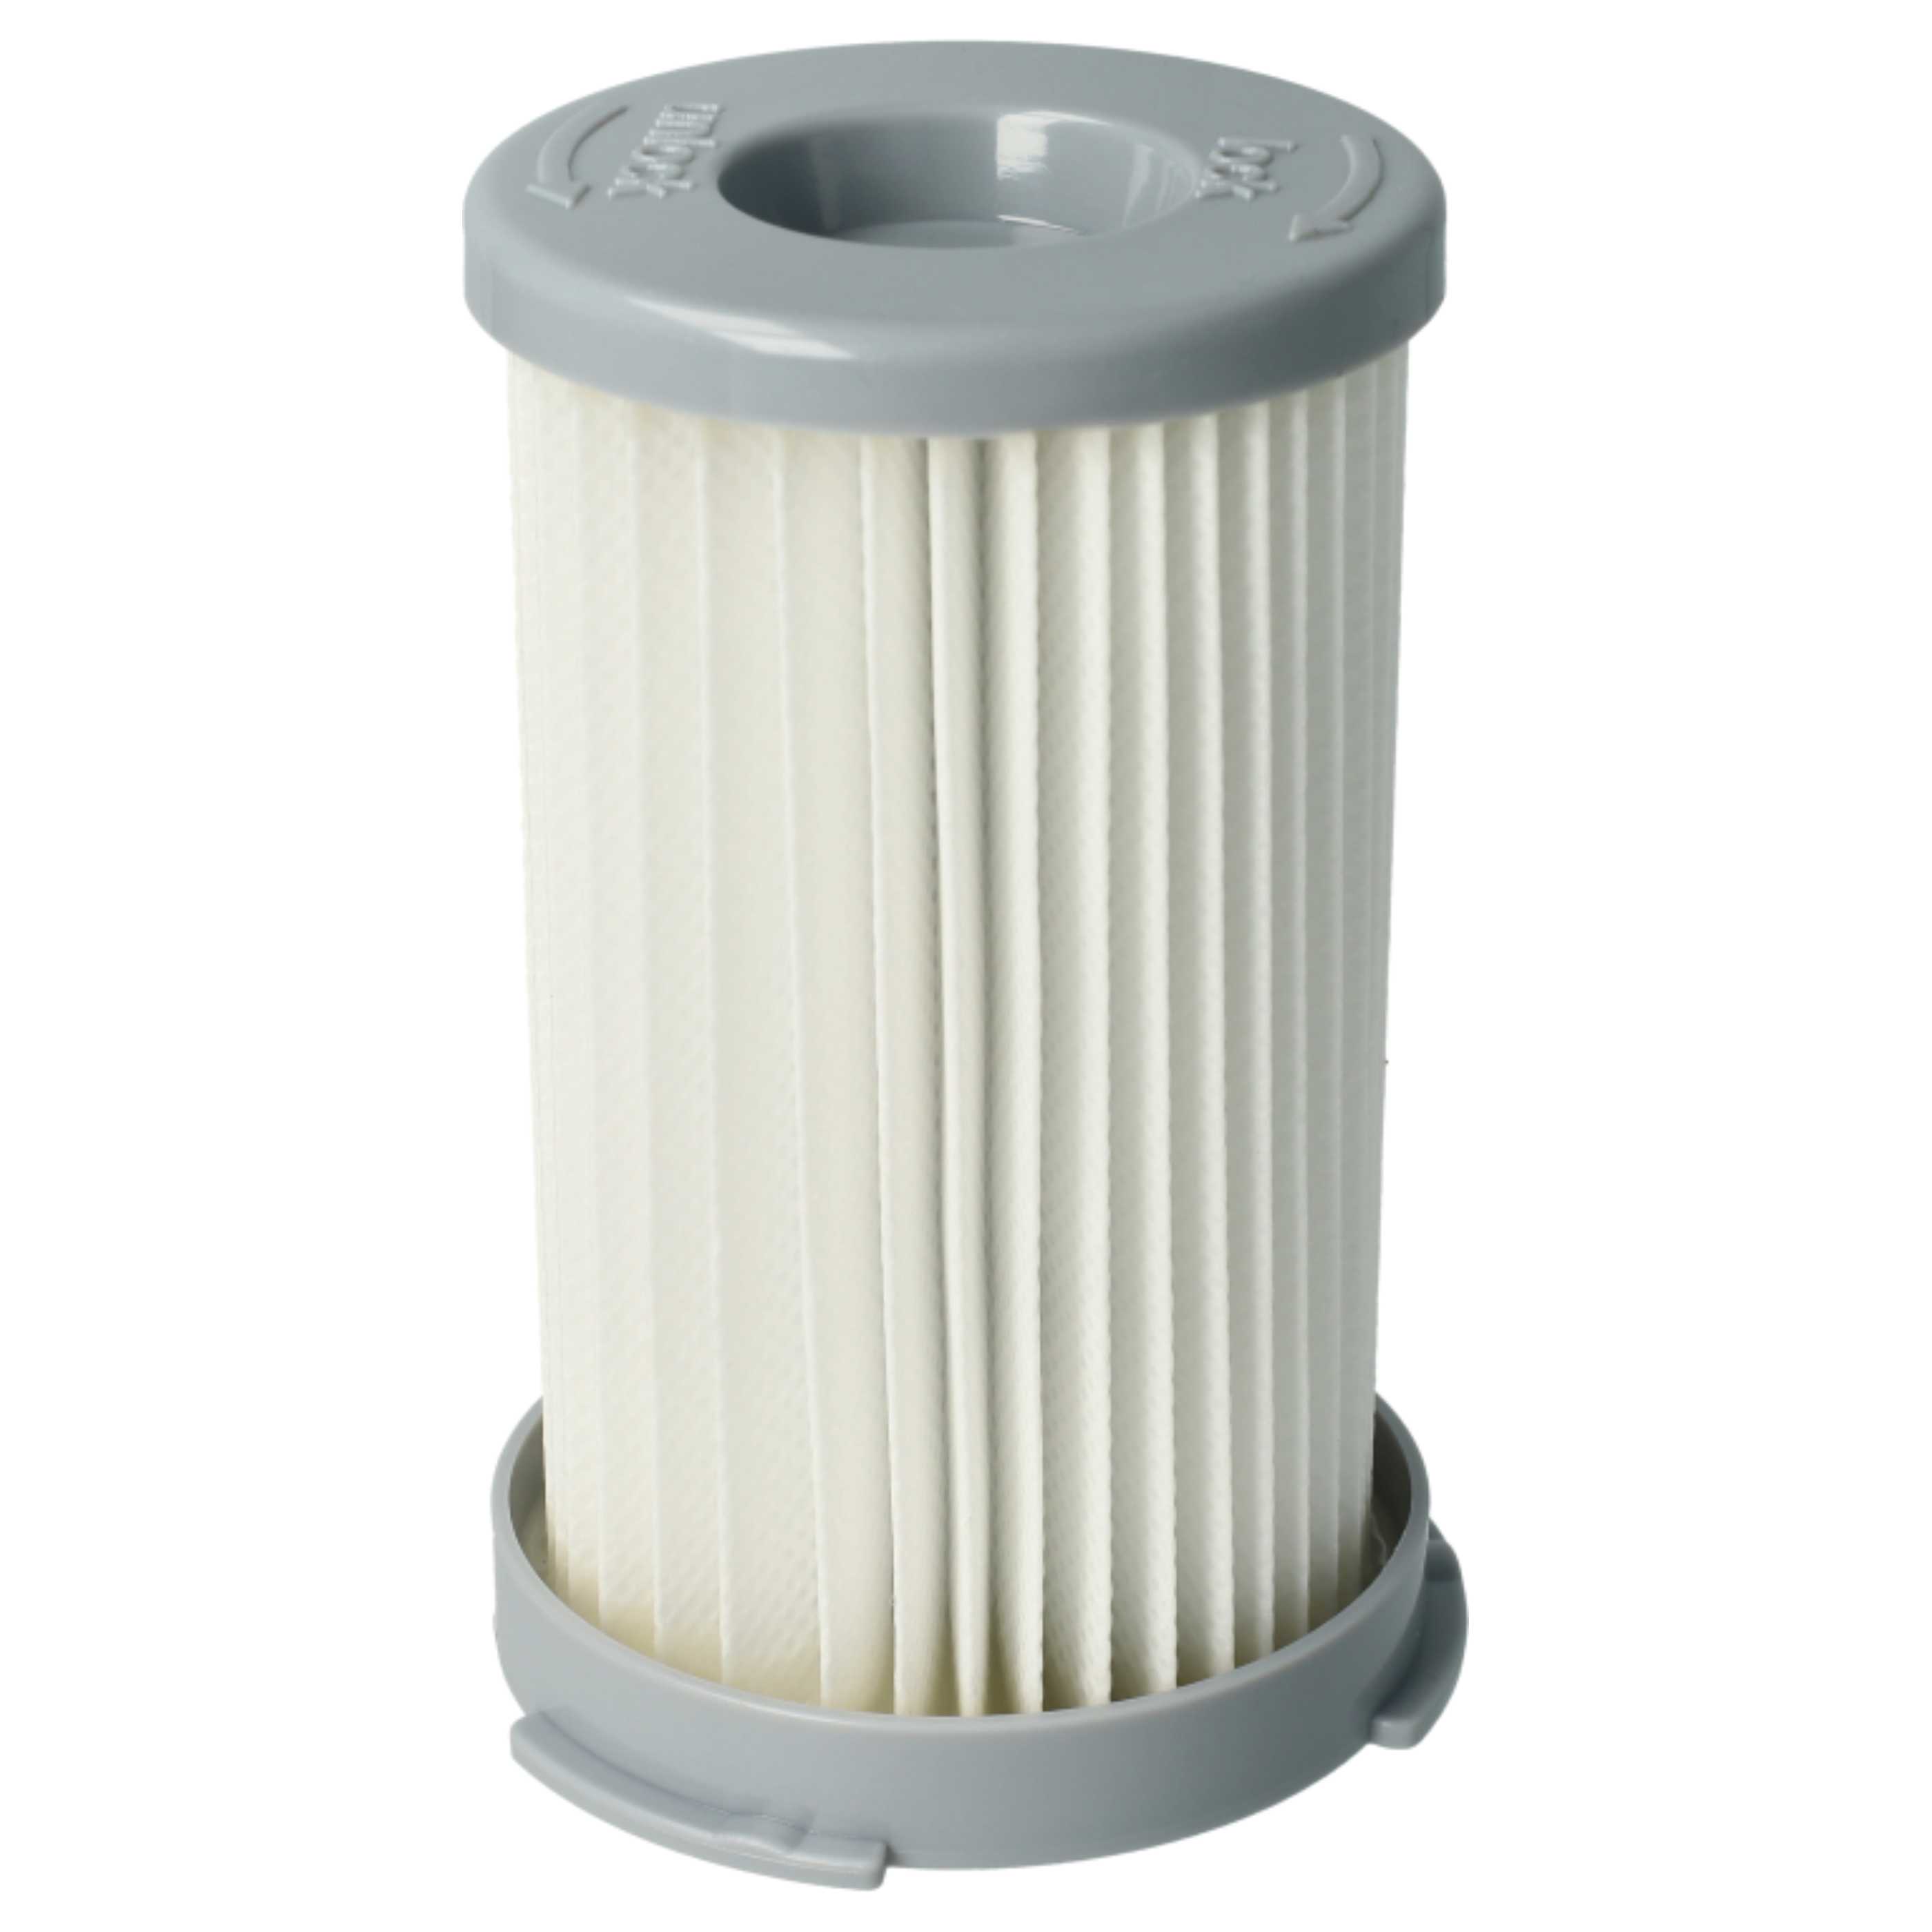 3x exhaust filter replaces Electrolux EF75B for AEG/Electrolux Vacuum Cleaner